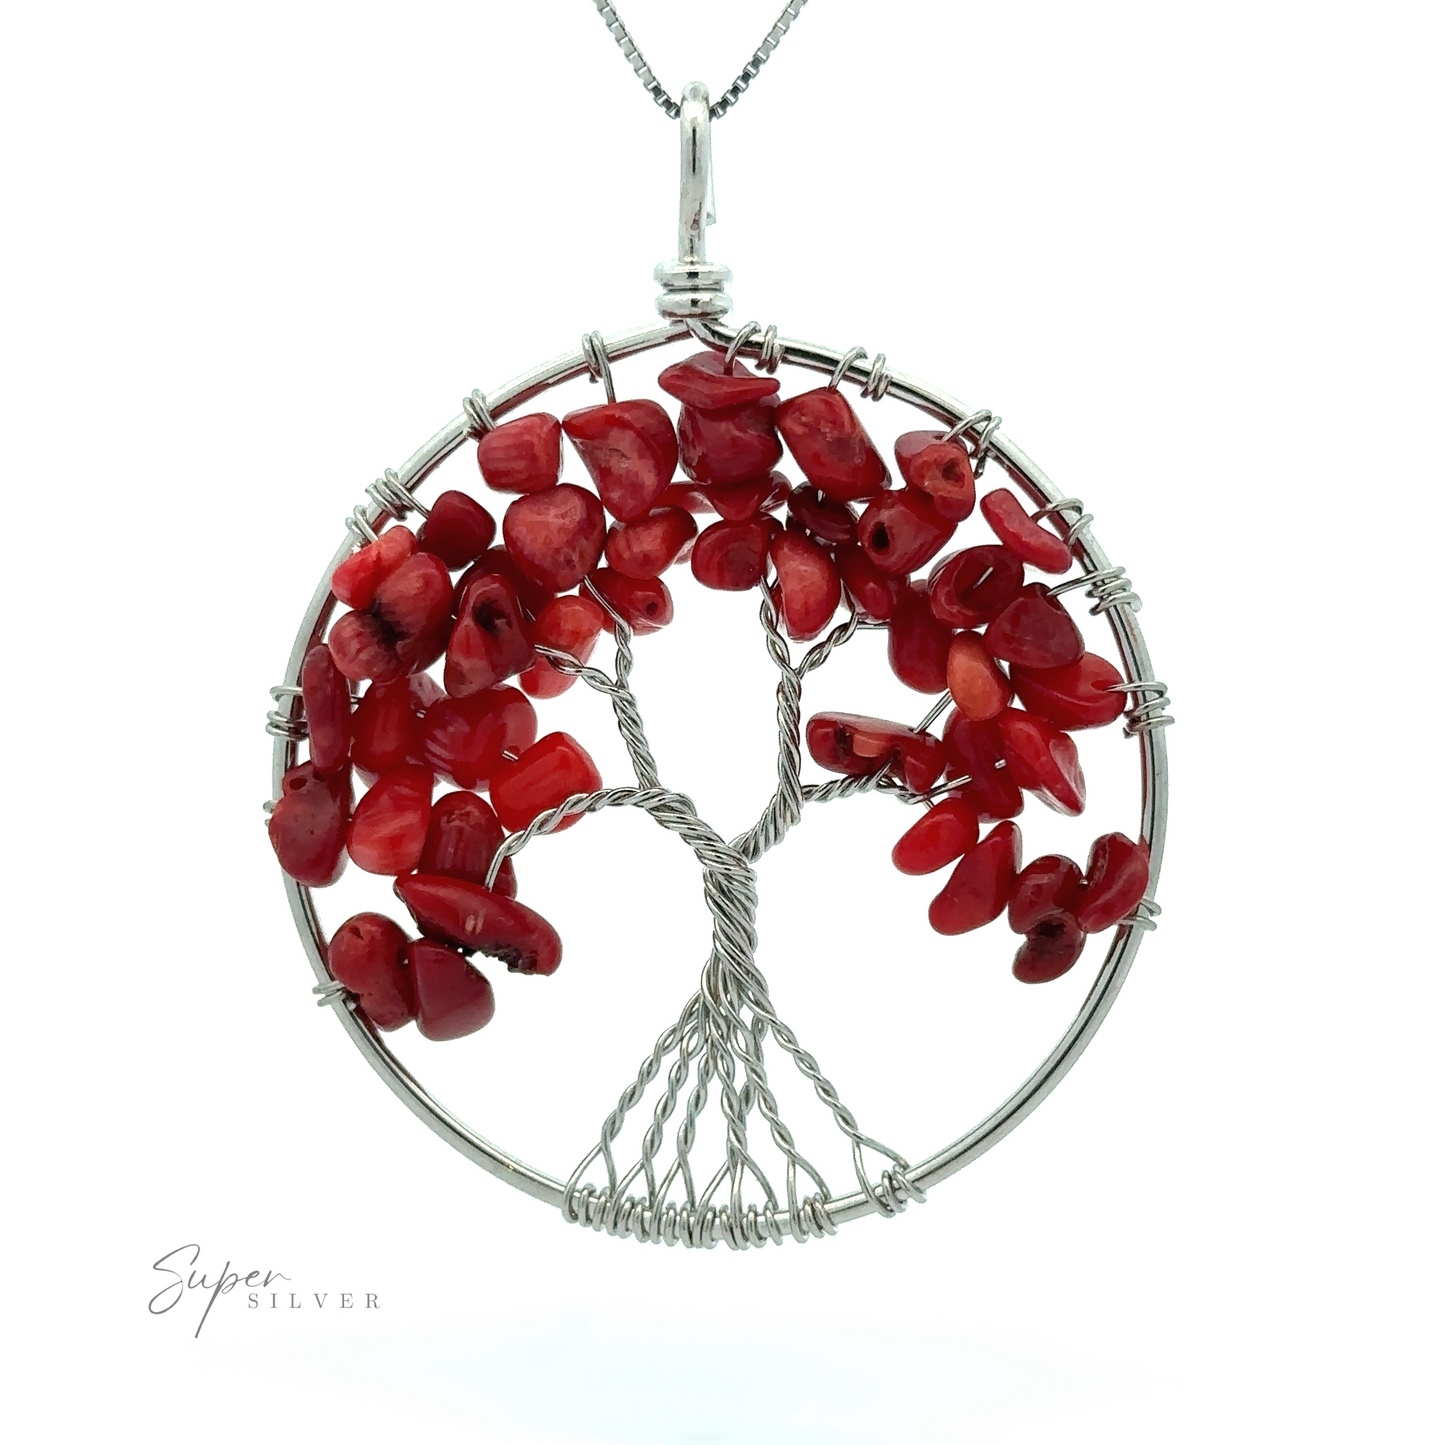 
                  
                    A round Wire Wrapped Tree of Life Pendant crafted from mixed metals features a tree design made with silver wire and adorned with red gemstone chips as leaves. The pendant hangs elegantly from a thin silver chain. The text "Super Silver" is visible at the bottom left.
                  
                